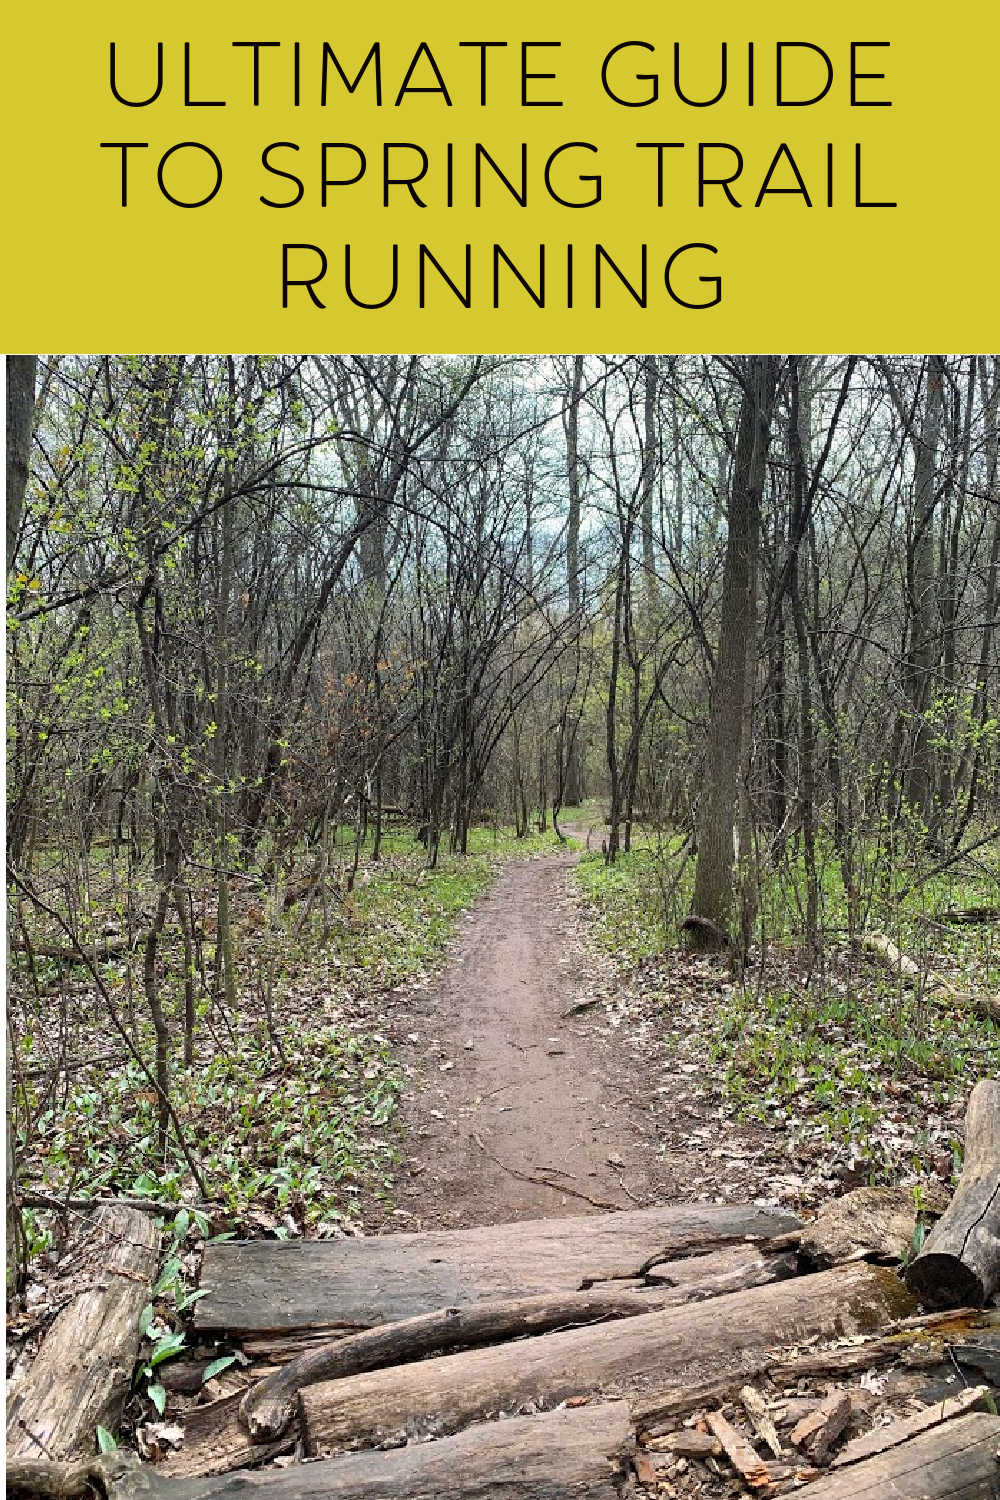 Ultimate Guide to Spring Trail Running